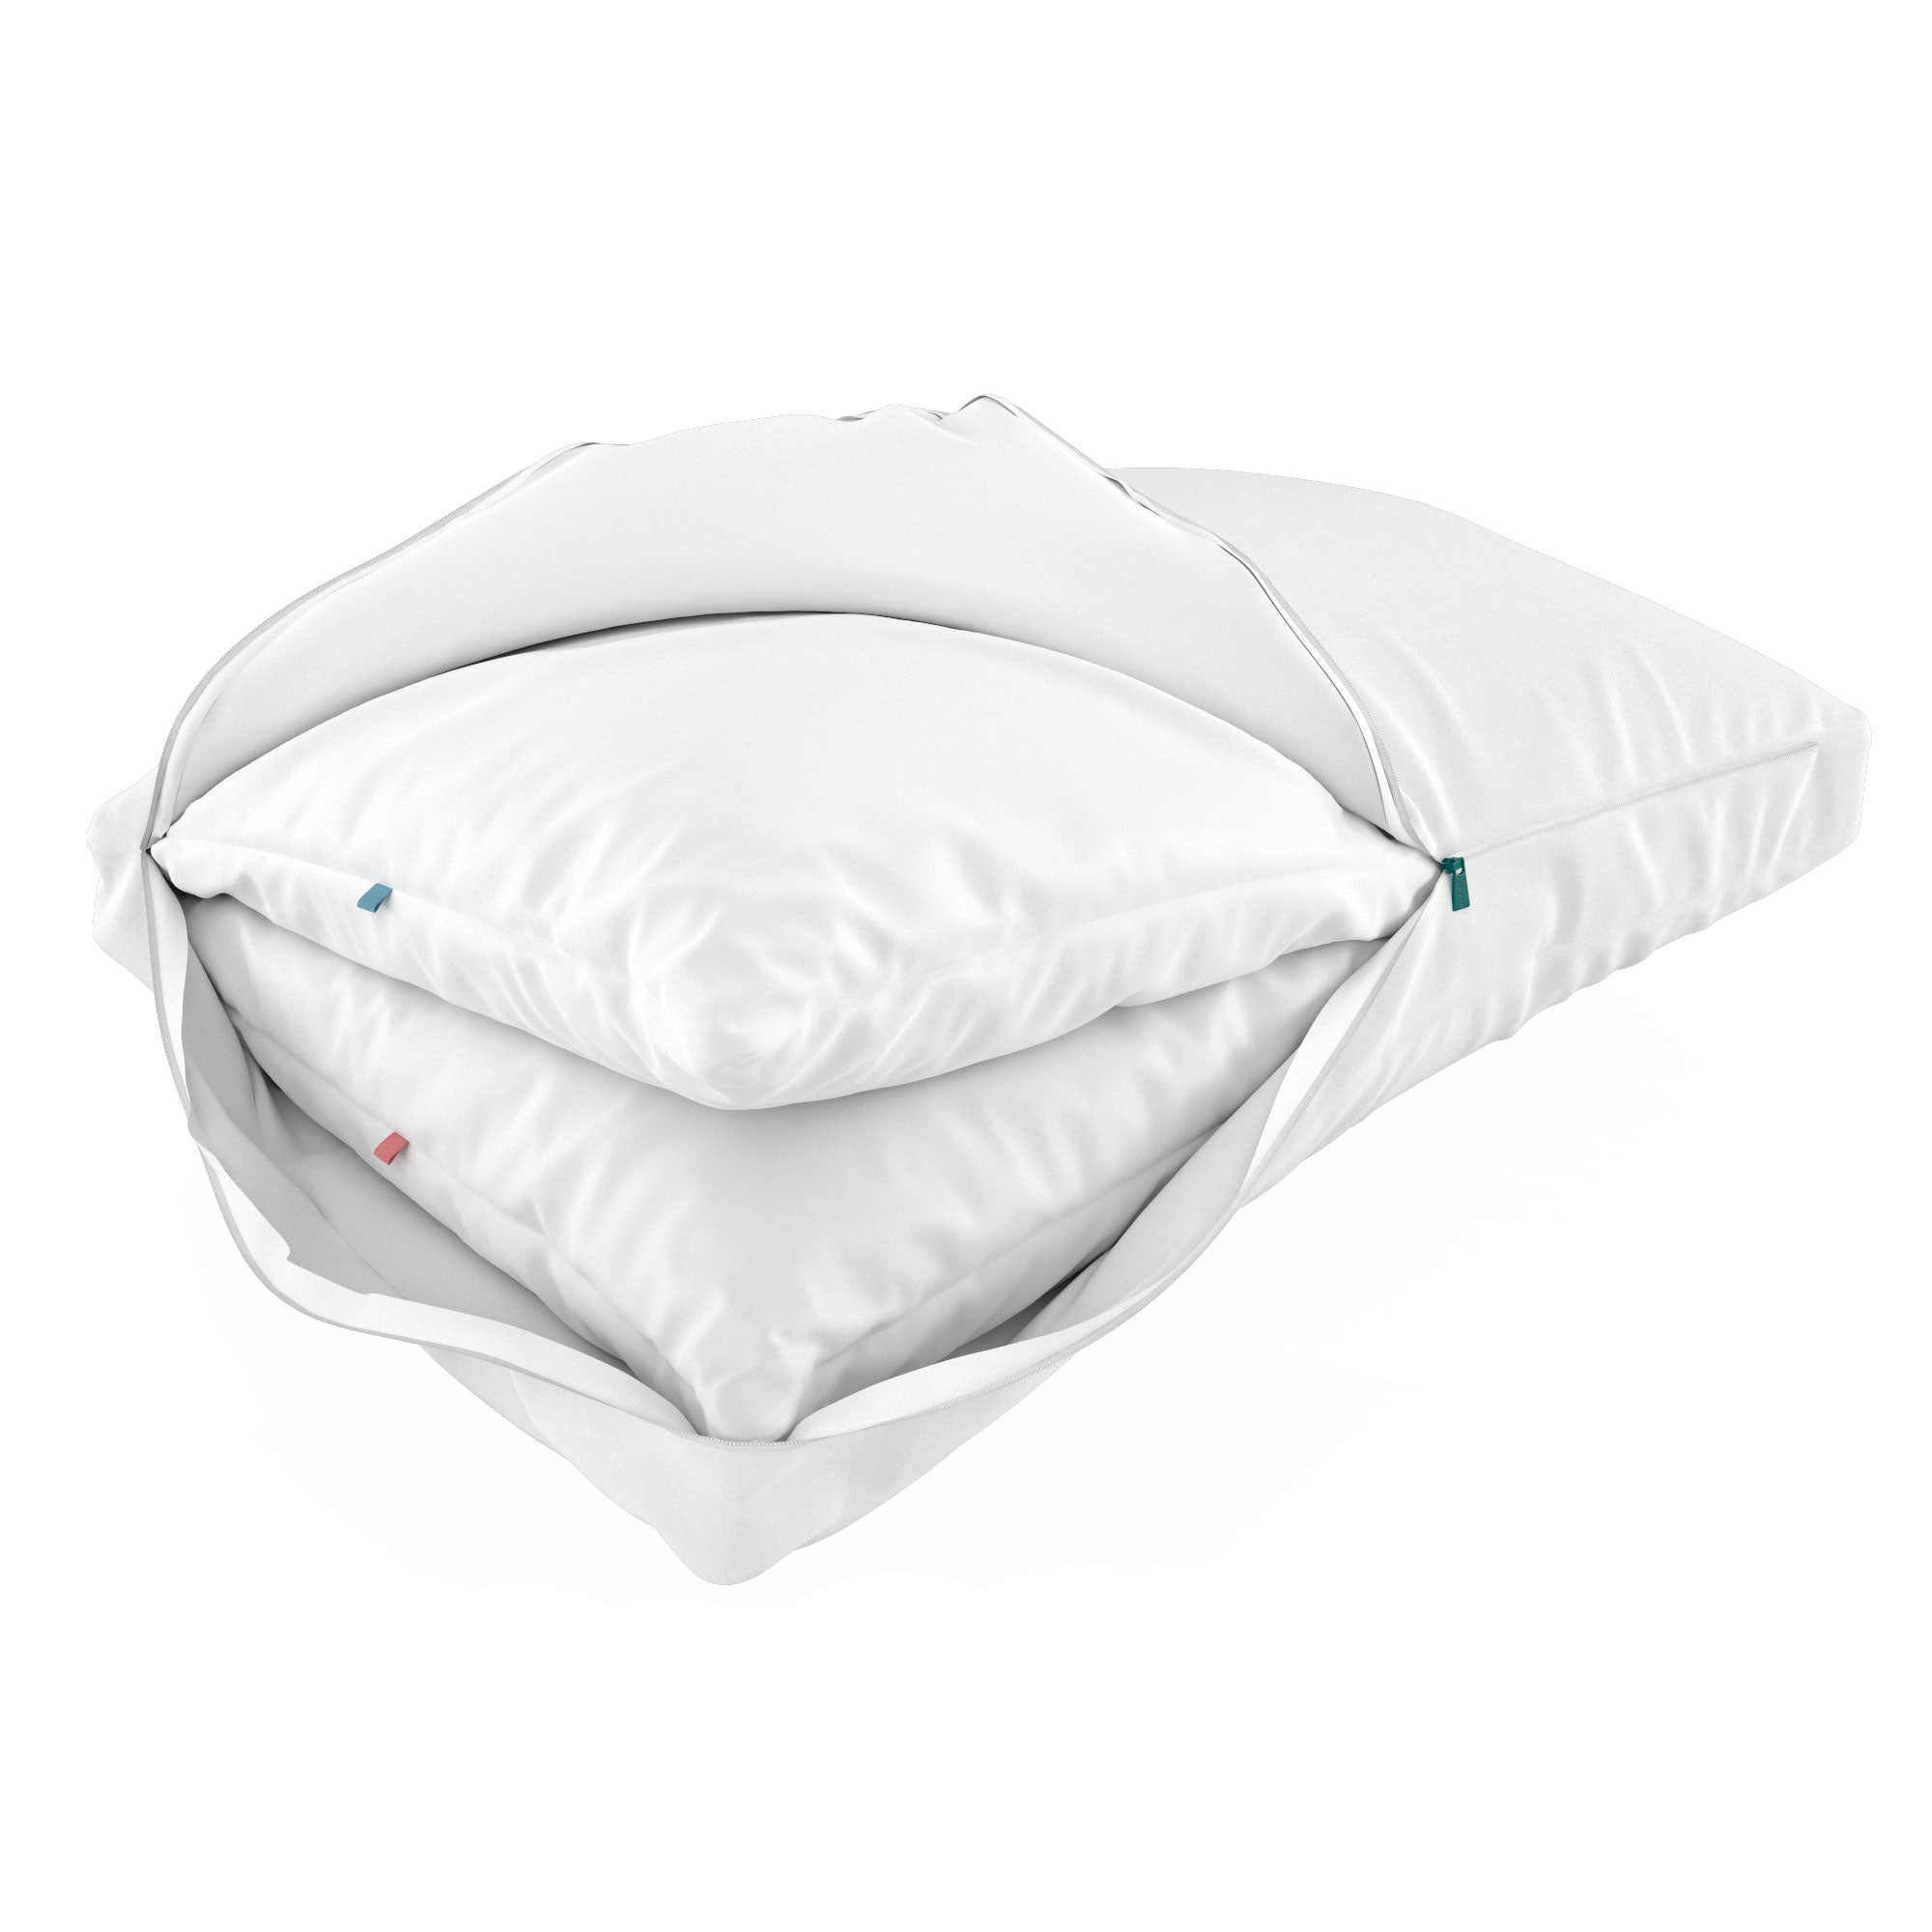 Sleepgram Bed Support Sleeping Pillow with Microfiber Cover, King, White